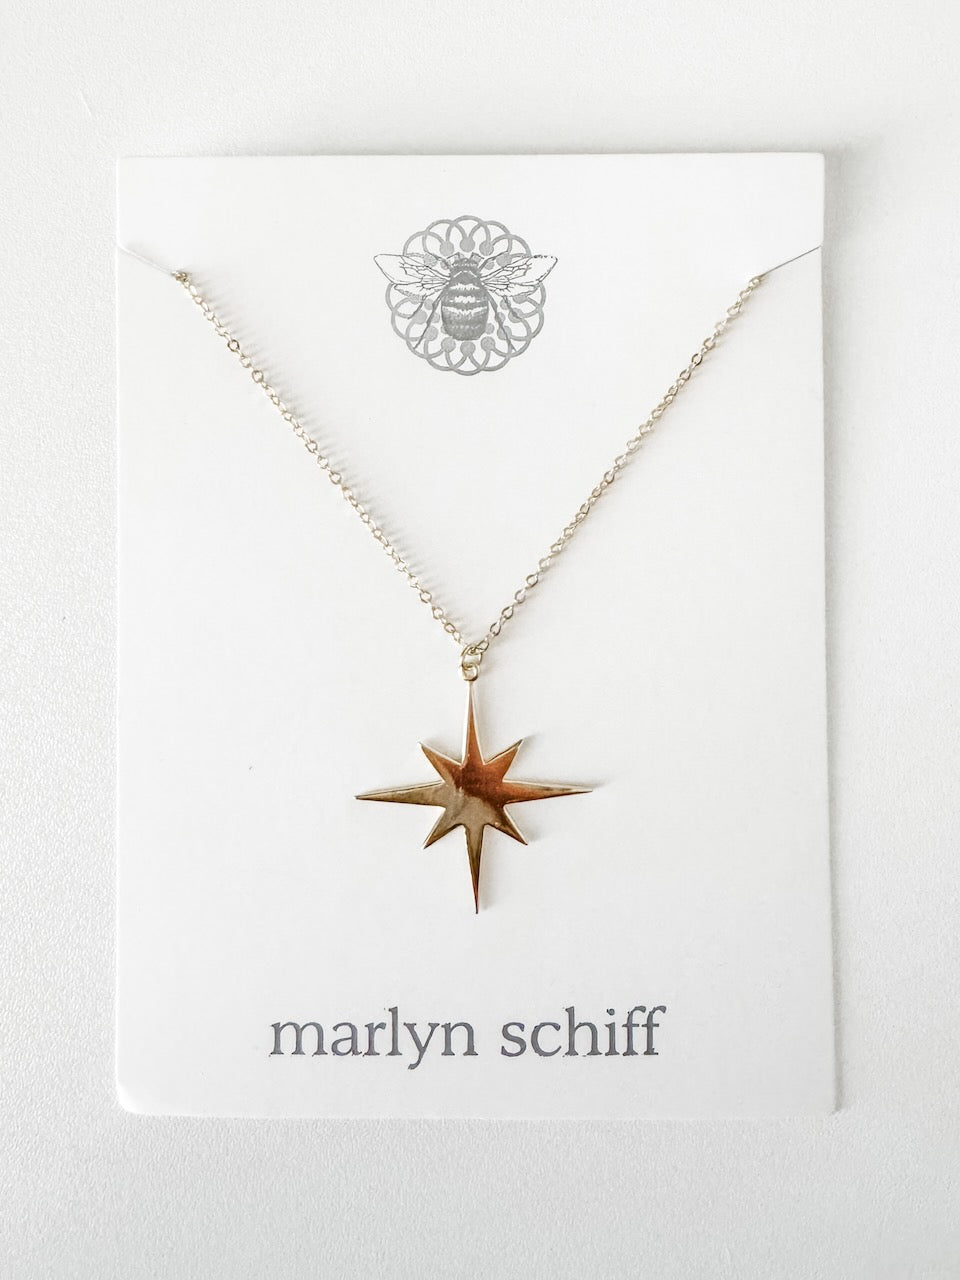 The North Star Pendant Necklace